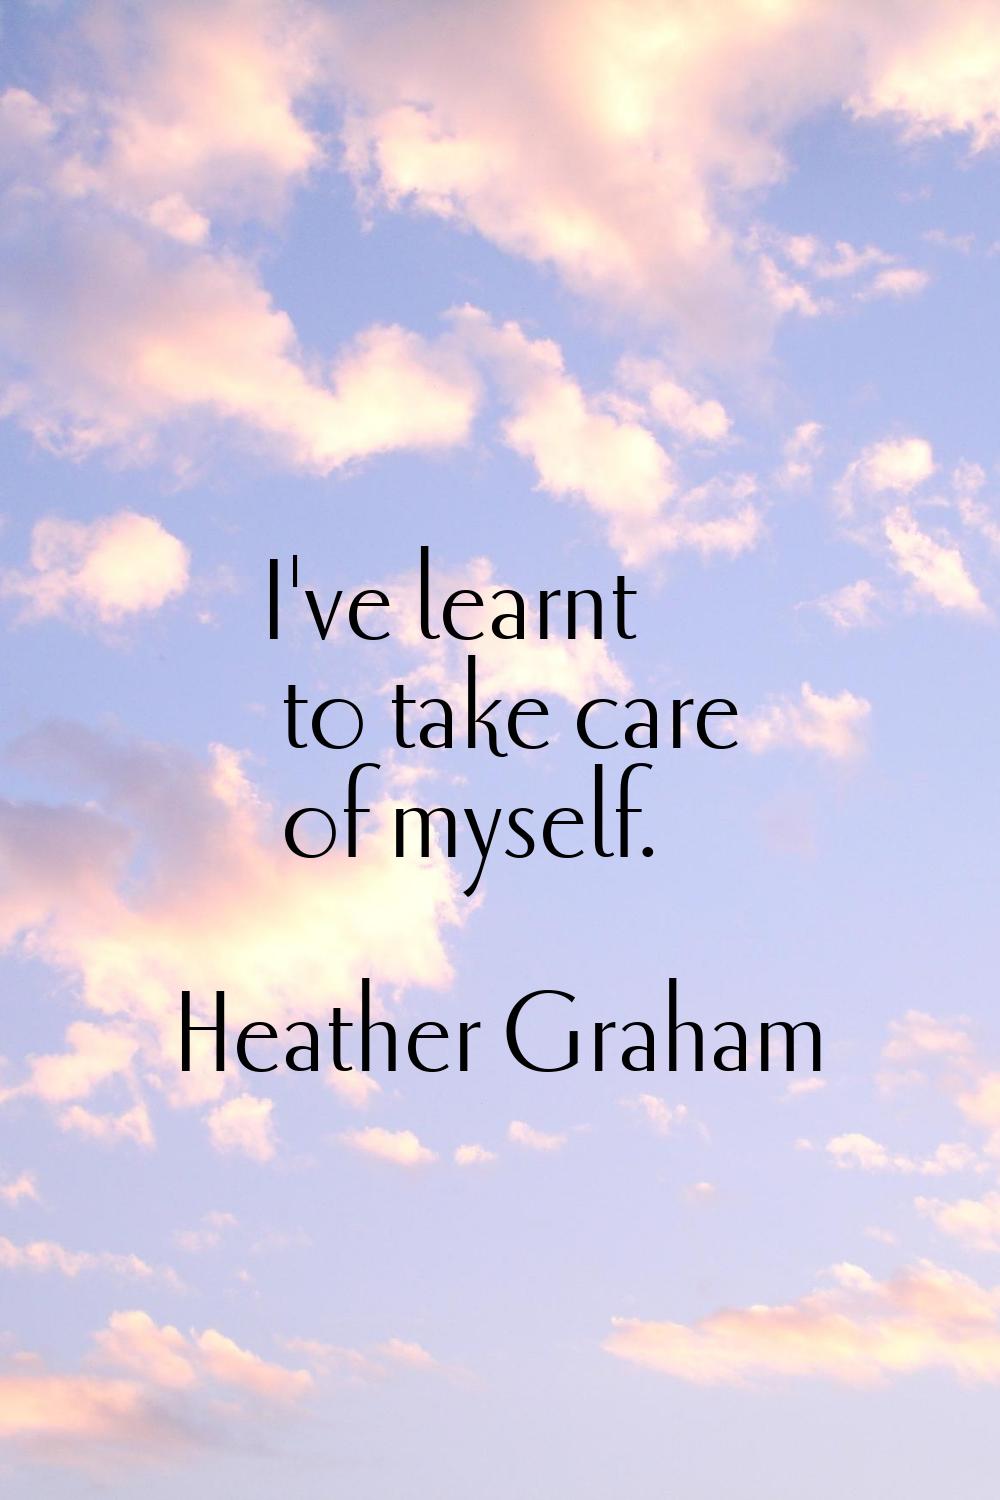 I've learnt to take care of myself.